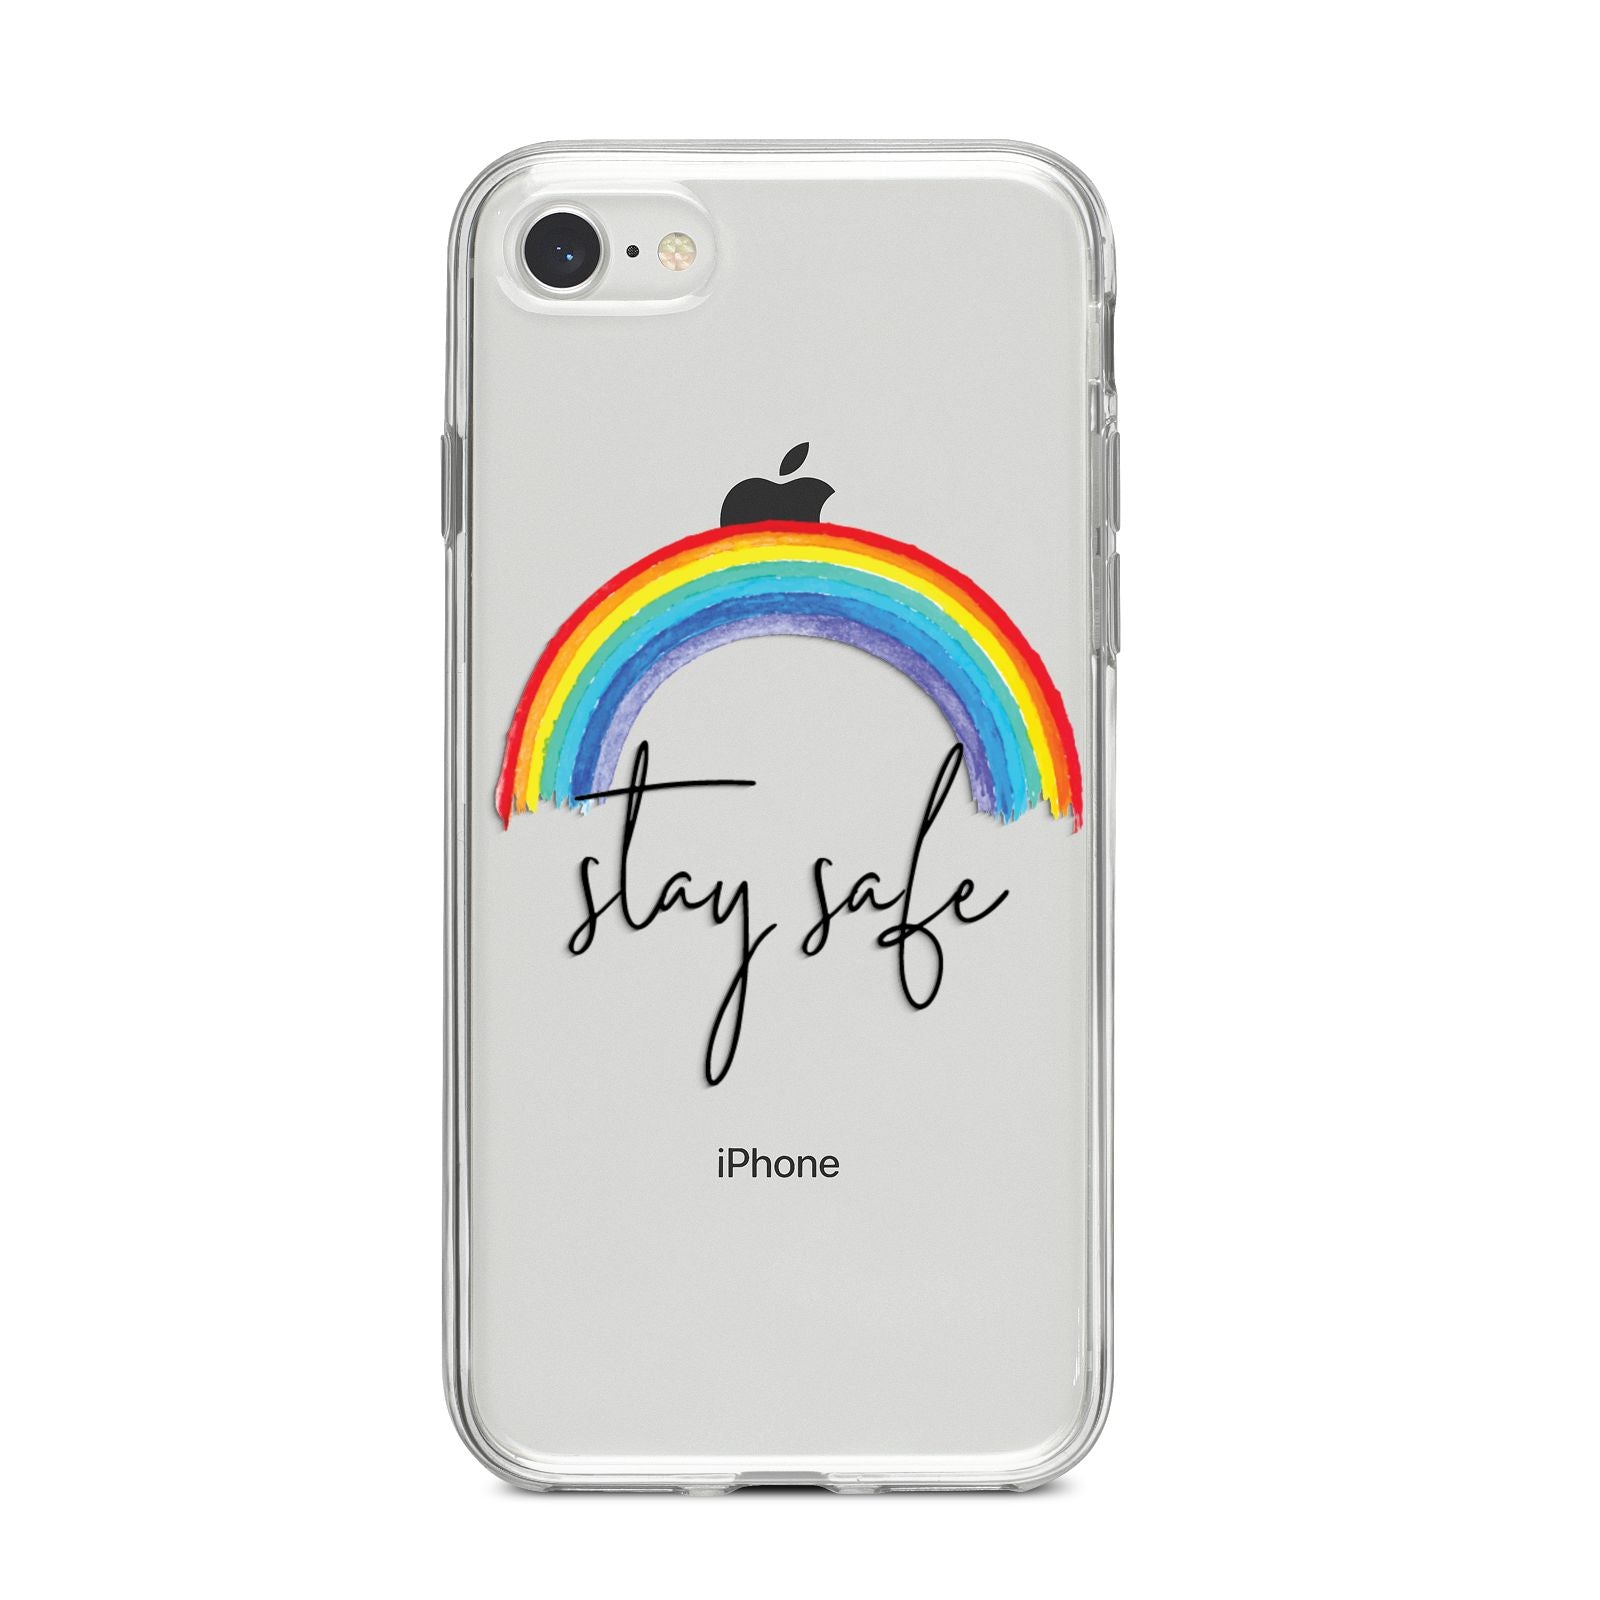 Stay Safe Rainbow iPhone 8 Bumper Case on Silver iPhone